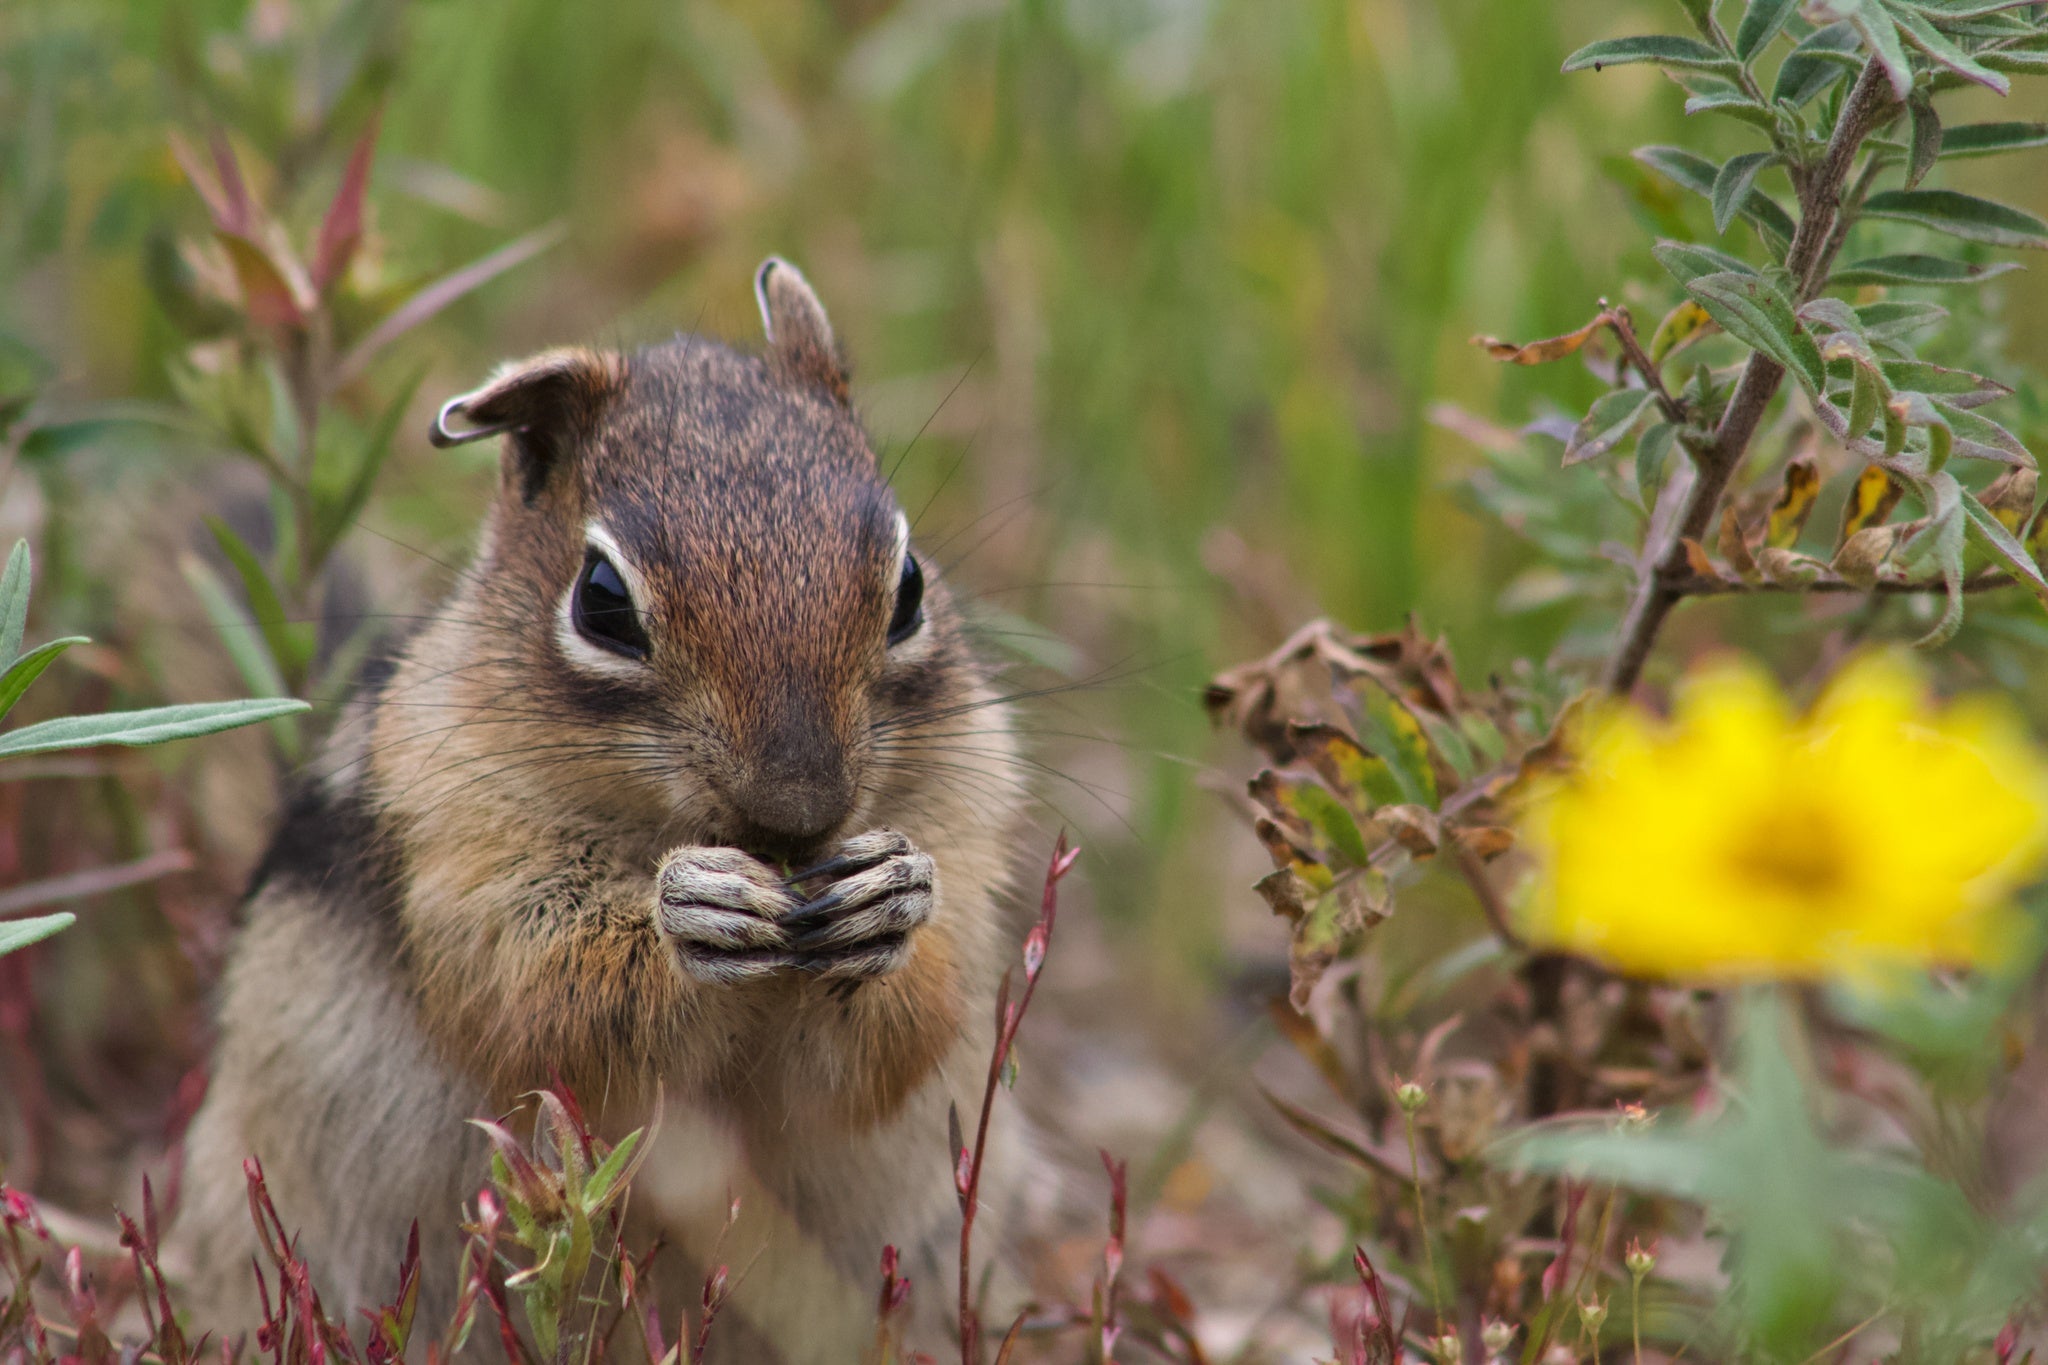 The study shows that bolder, more aggressive squirrels tend to find more food or defend a larger territory